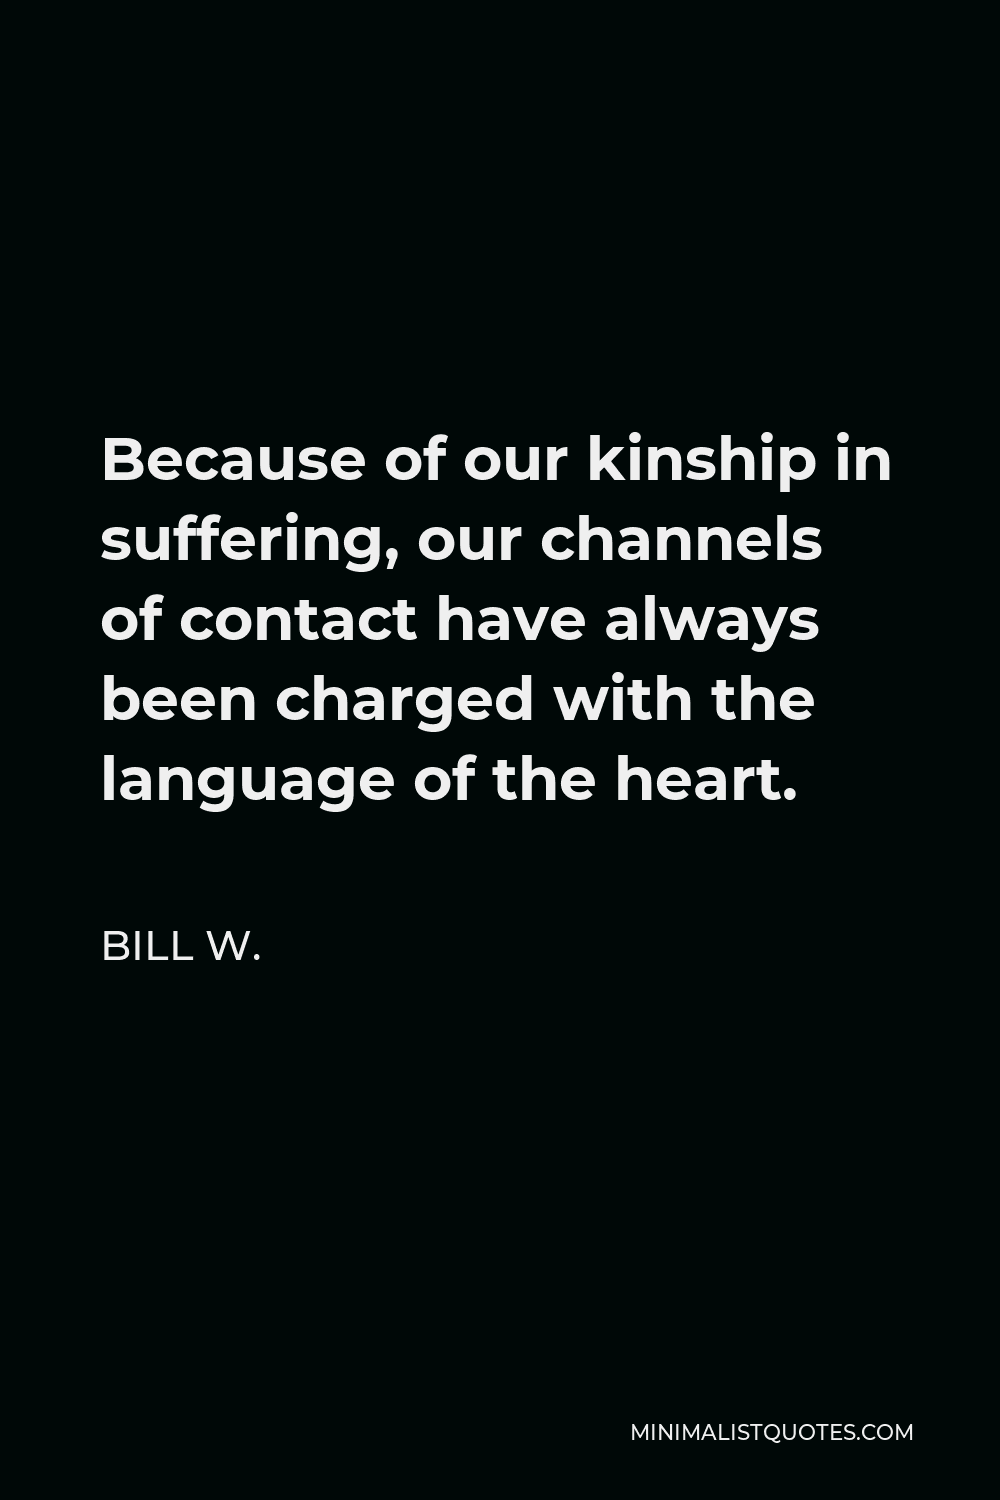 Bill W. Quote - Because of our kinship in suffering, our channels of contact have always been charged with the language of the heart.